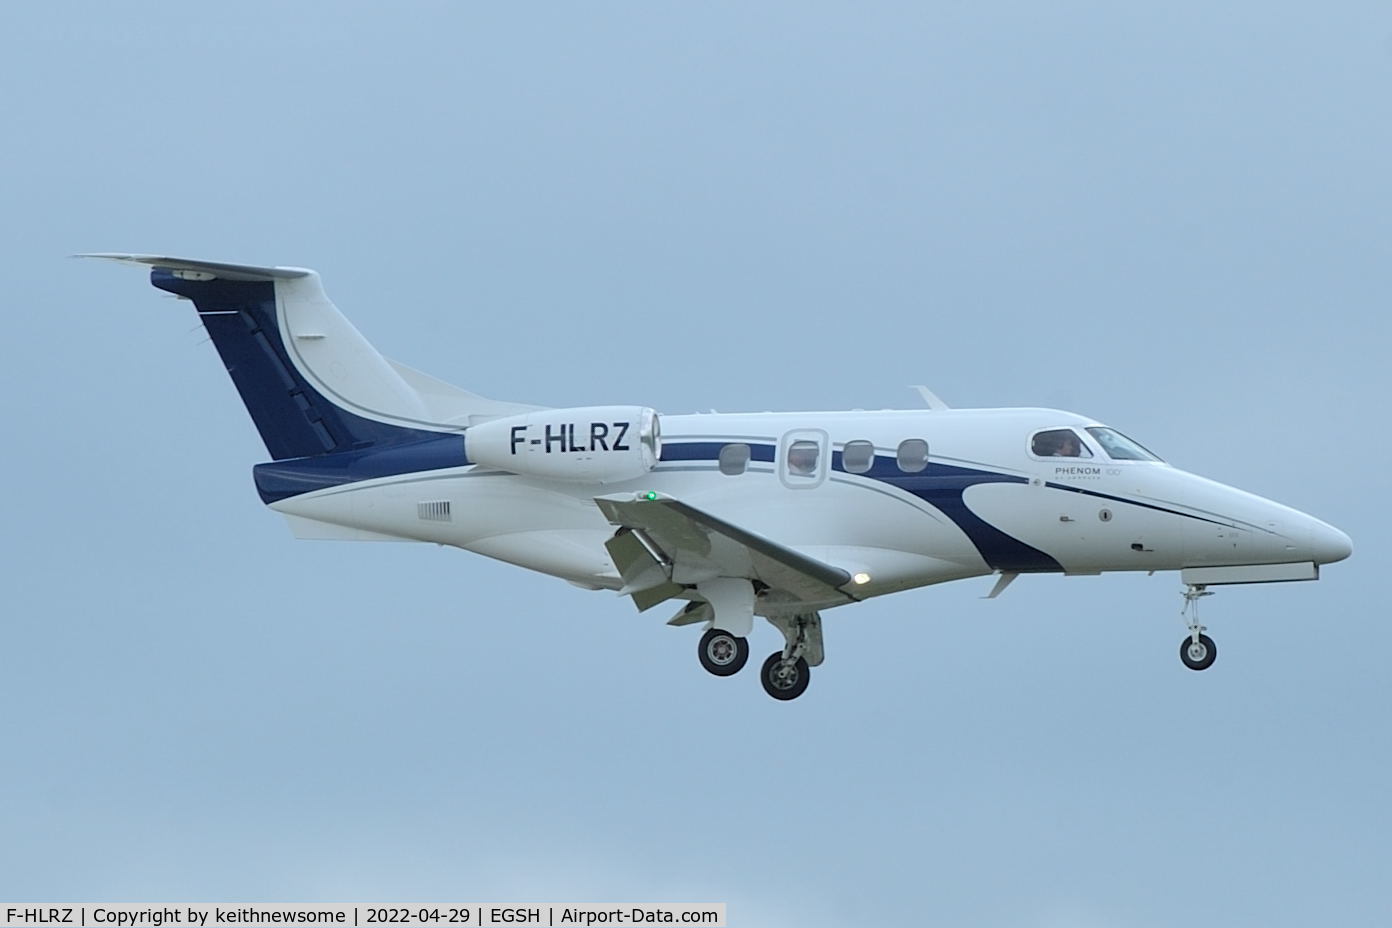 F-HLRZ, 2010 Embraer EMB-500 Phenom 100 C/N 50000165, Arriving at Norwich from Nice, France.